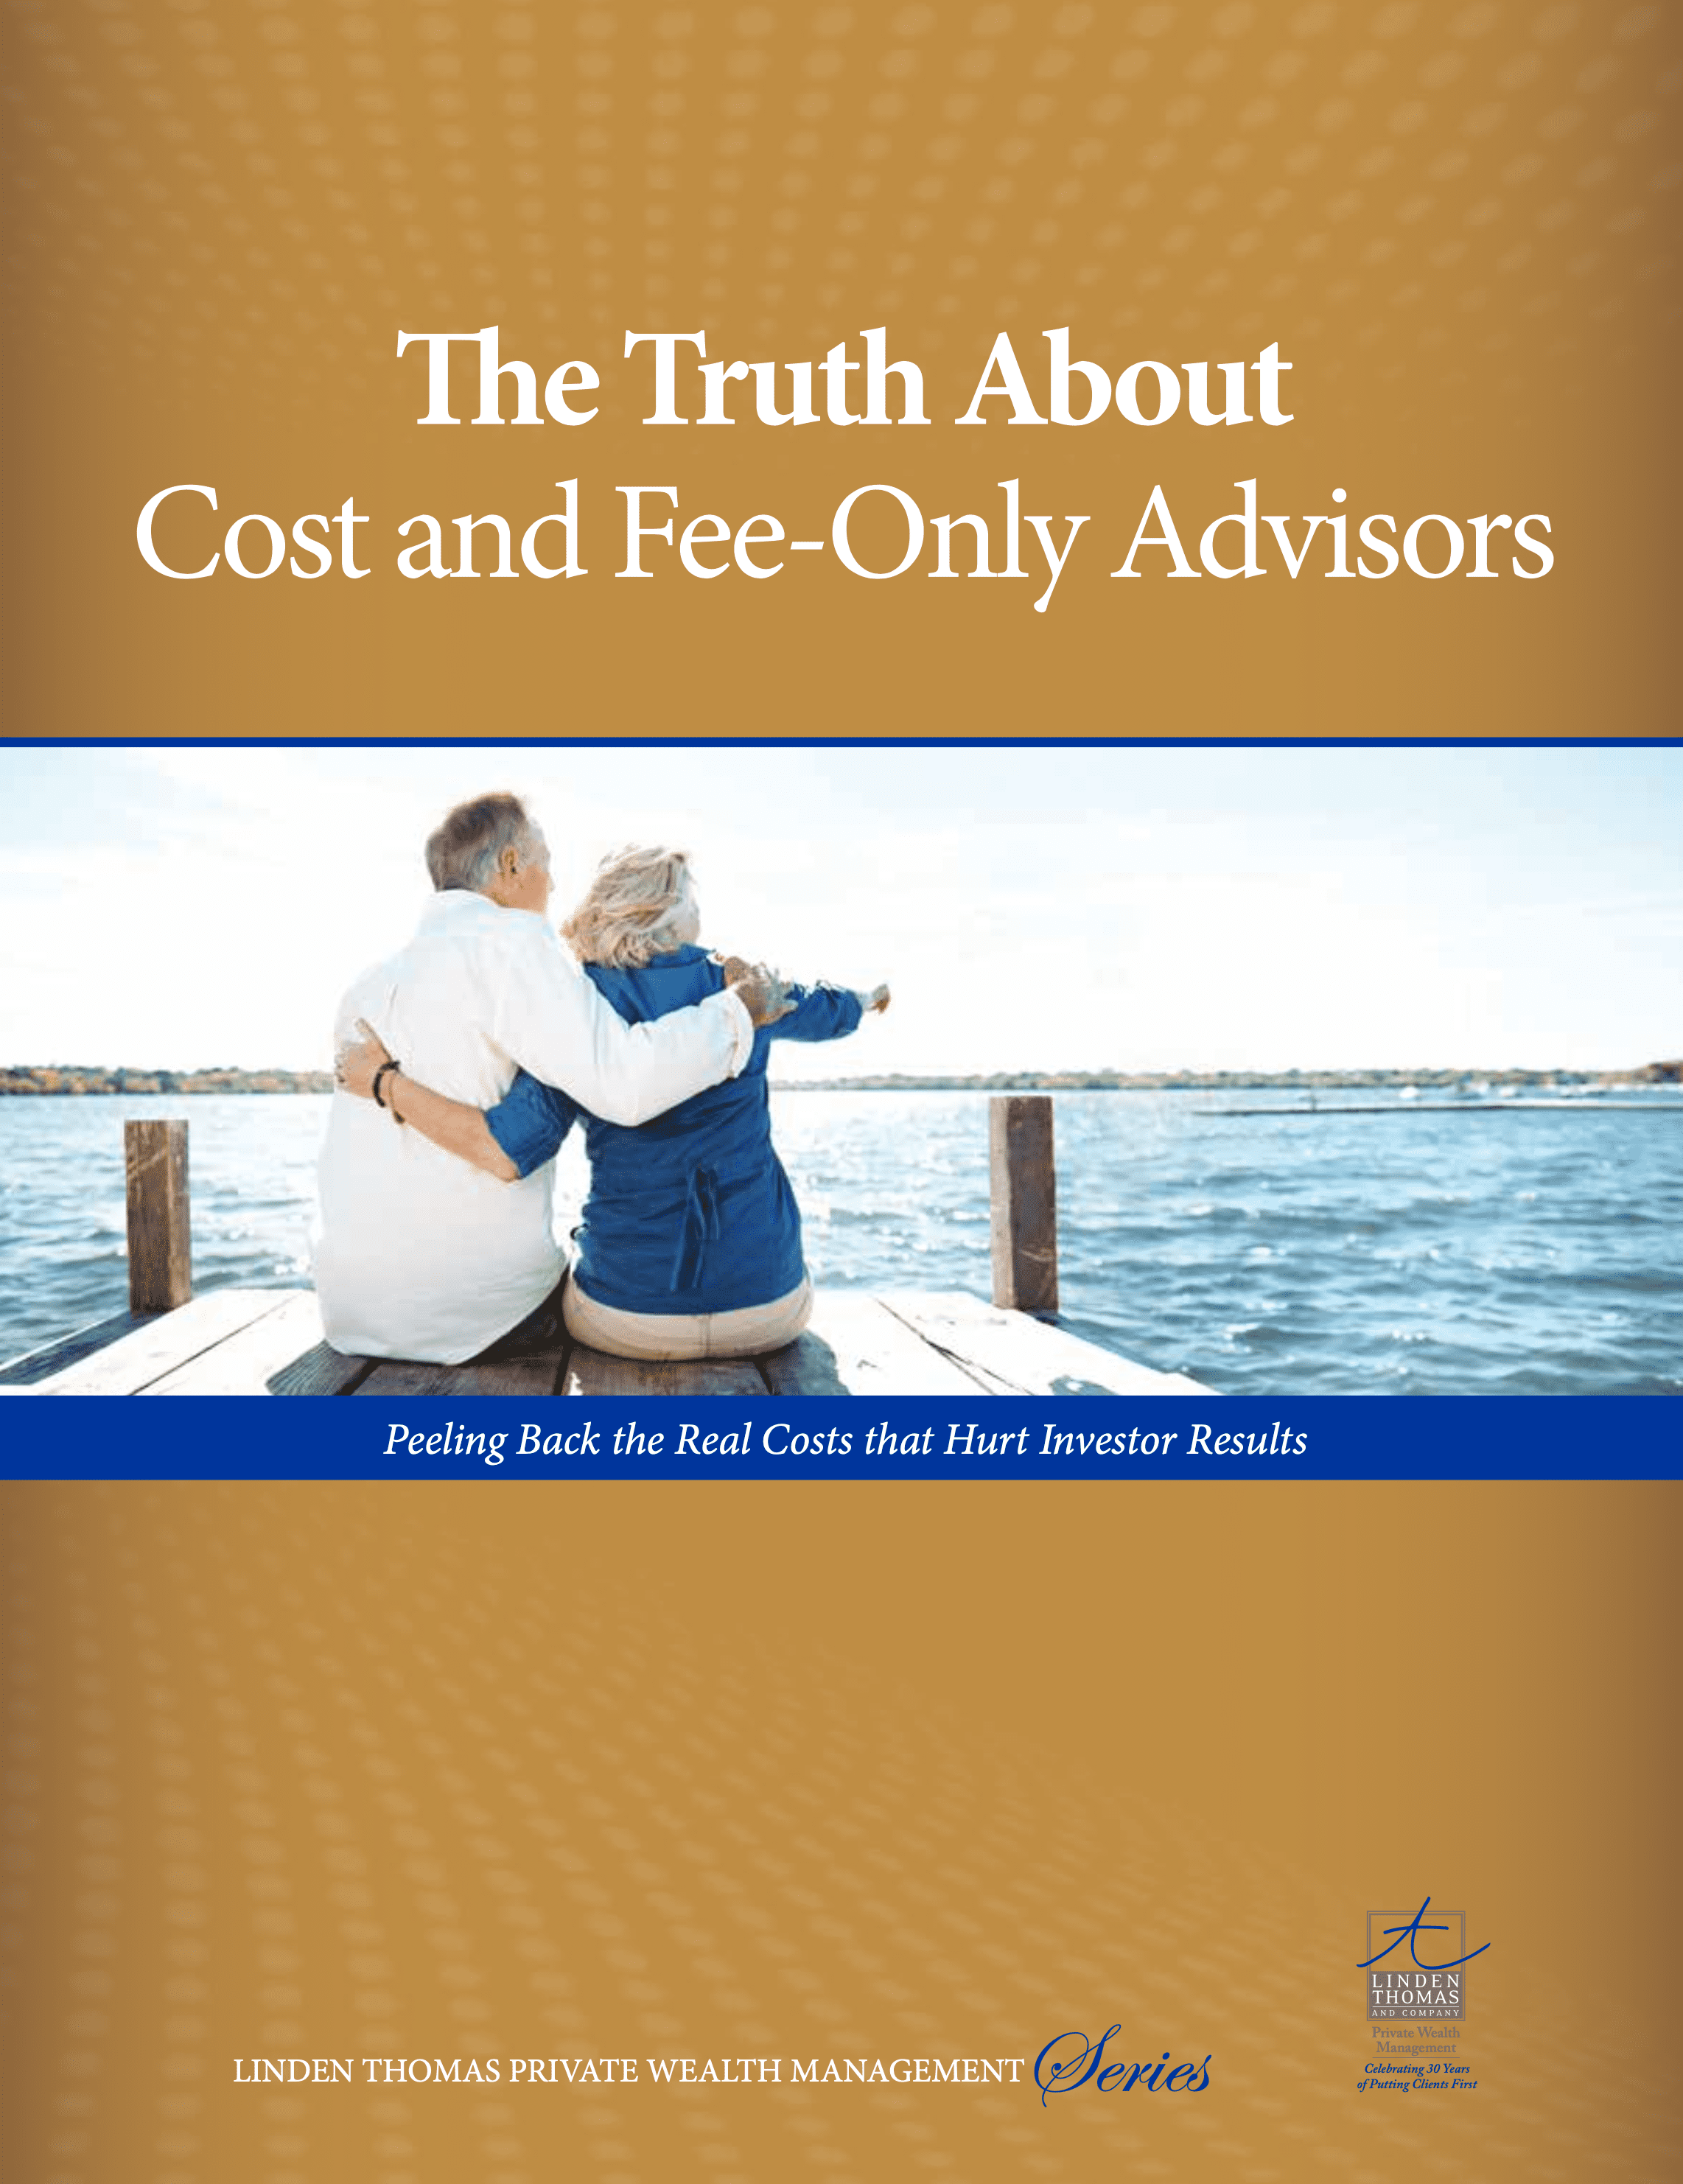 The Truth About Cost Fee-Only Advisors